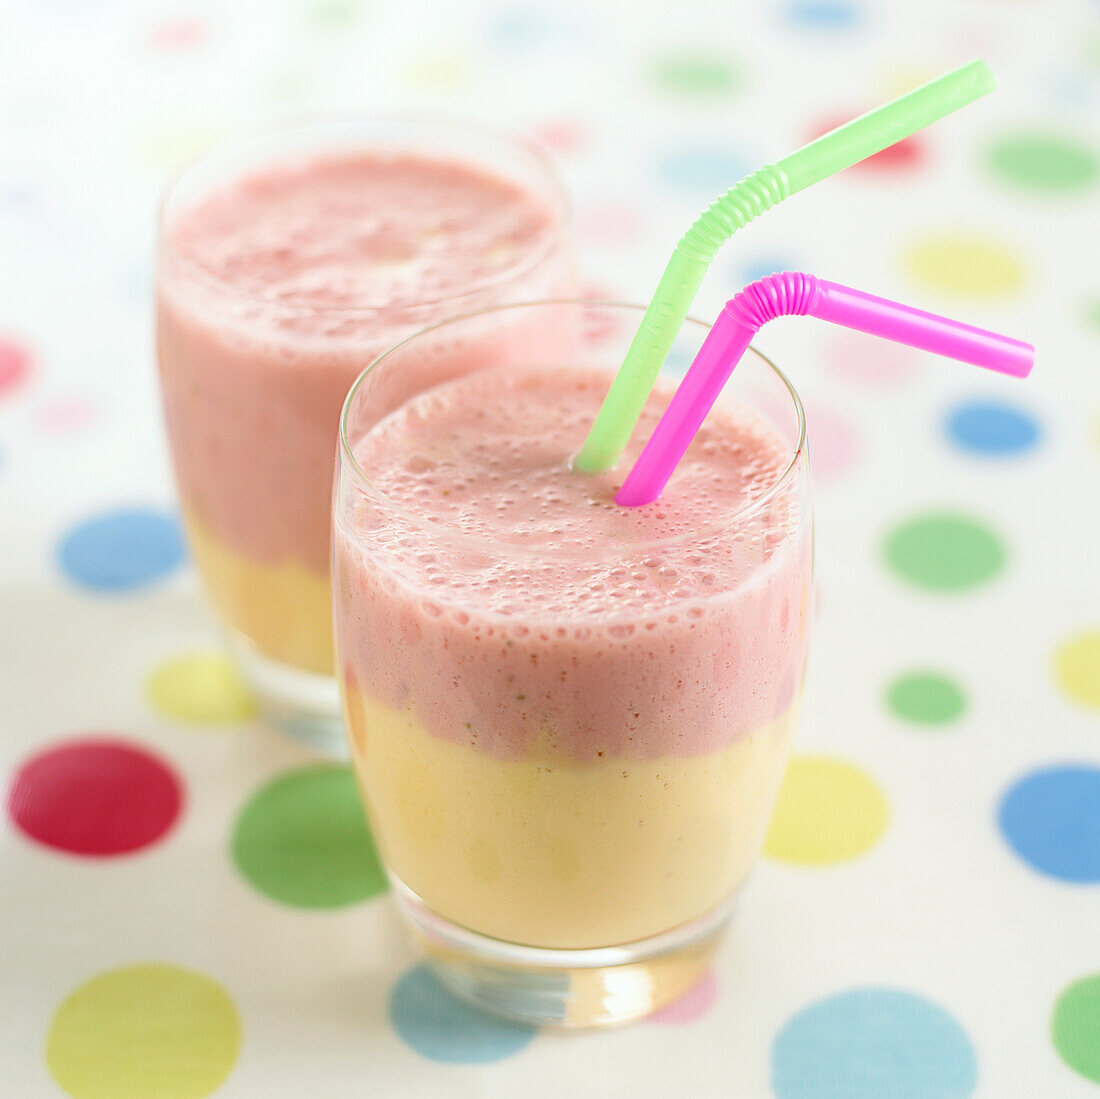 Two banana and strawberry smoothies